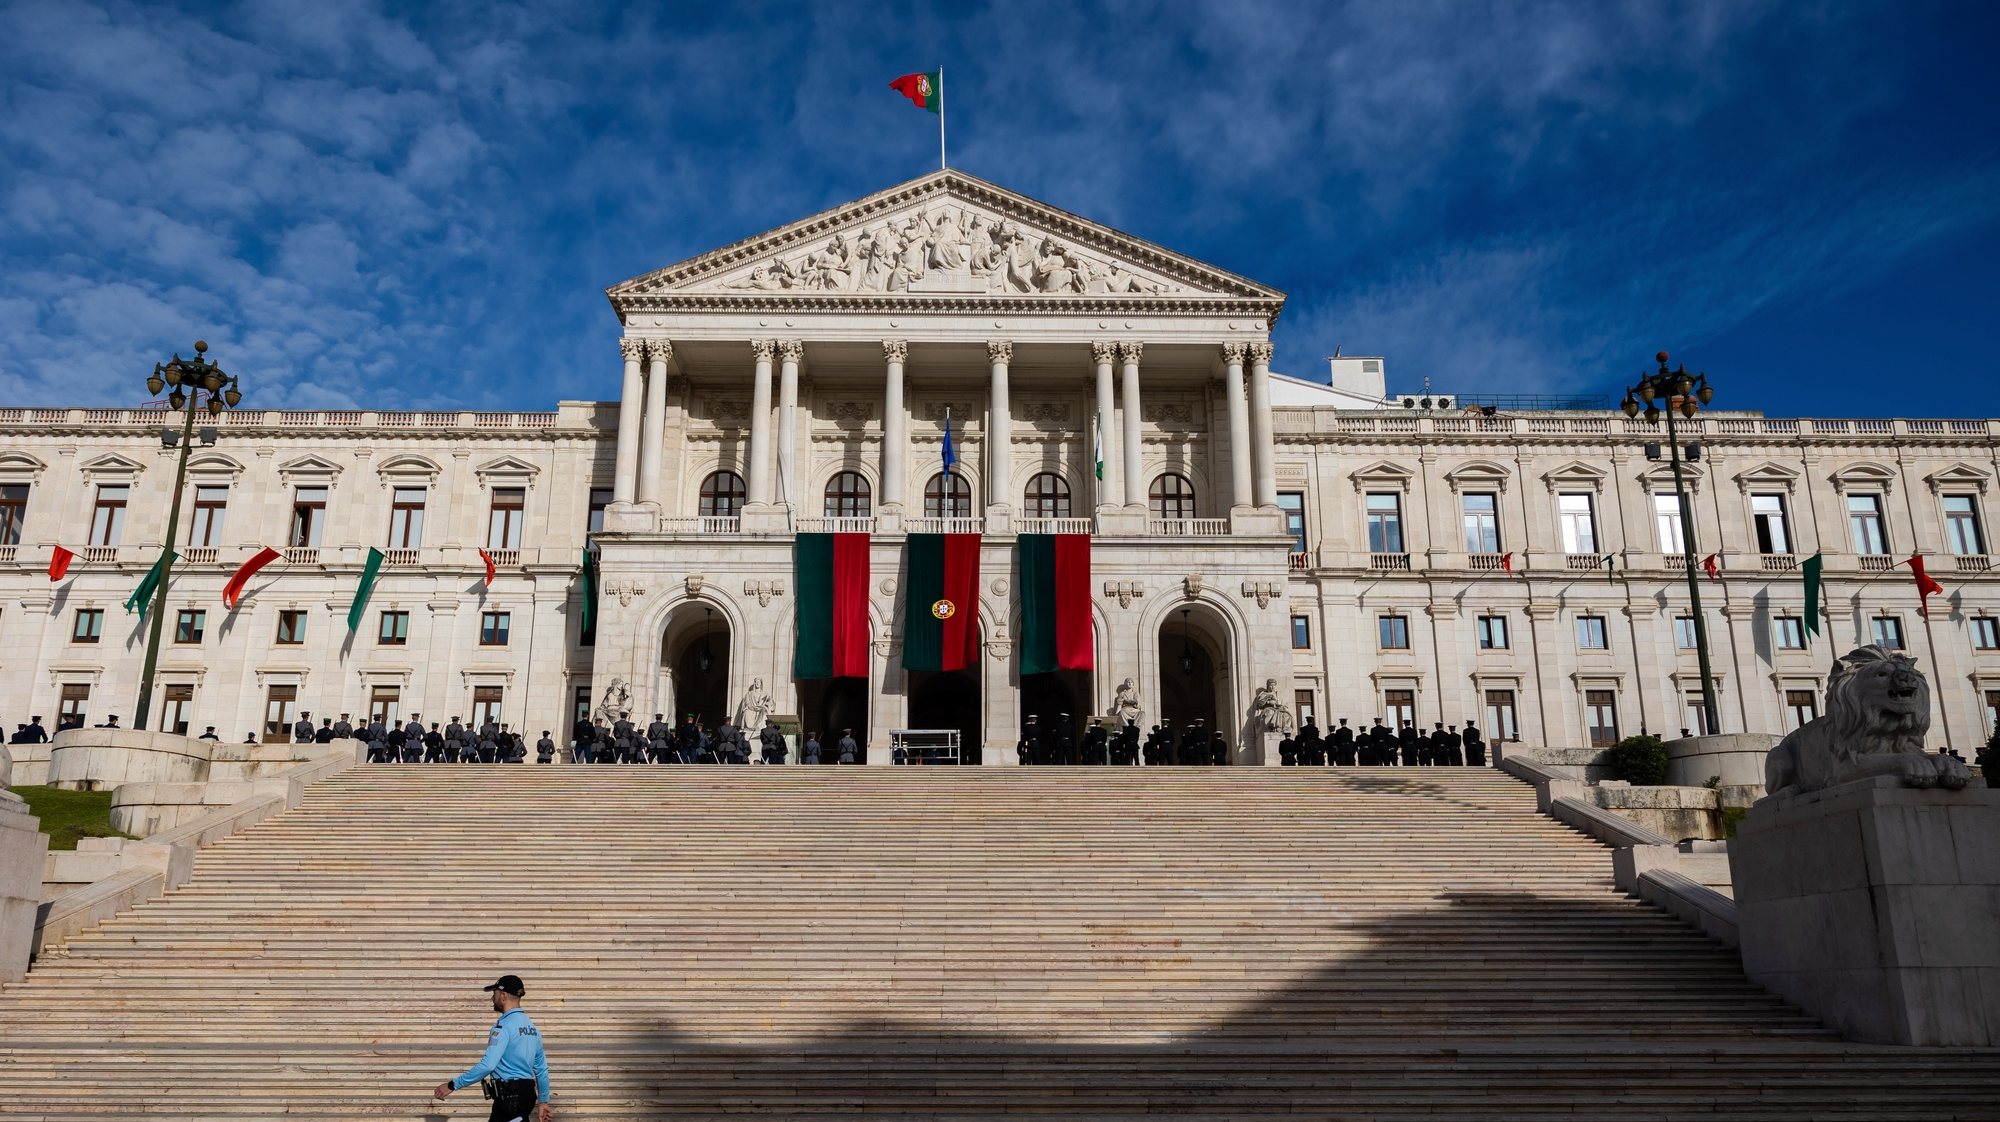 A police officer walks in front of the Portuguese Parliament before the Carnation Revolution 50th anniversary solemn comemorative session, in Lisbon, Portugal, 25 April 2024. Portugal celebrates the 50th anniversary of the Carnation Revolution that ended the authoritarian regime of Estado Novo (New State) that ruled the country between 1926 to 1974. JOSE SENA GOULAO/LUSA